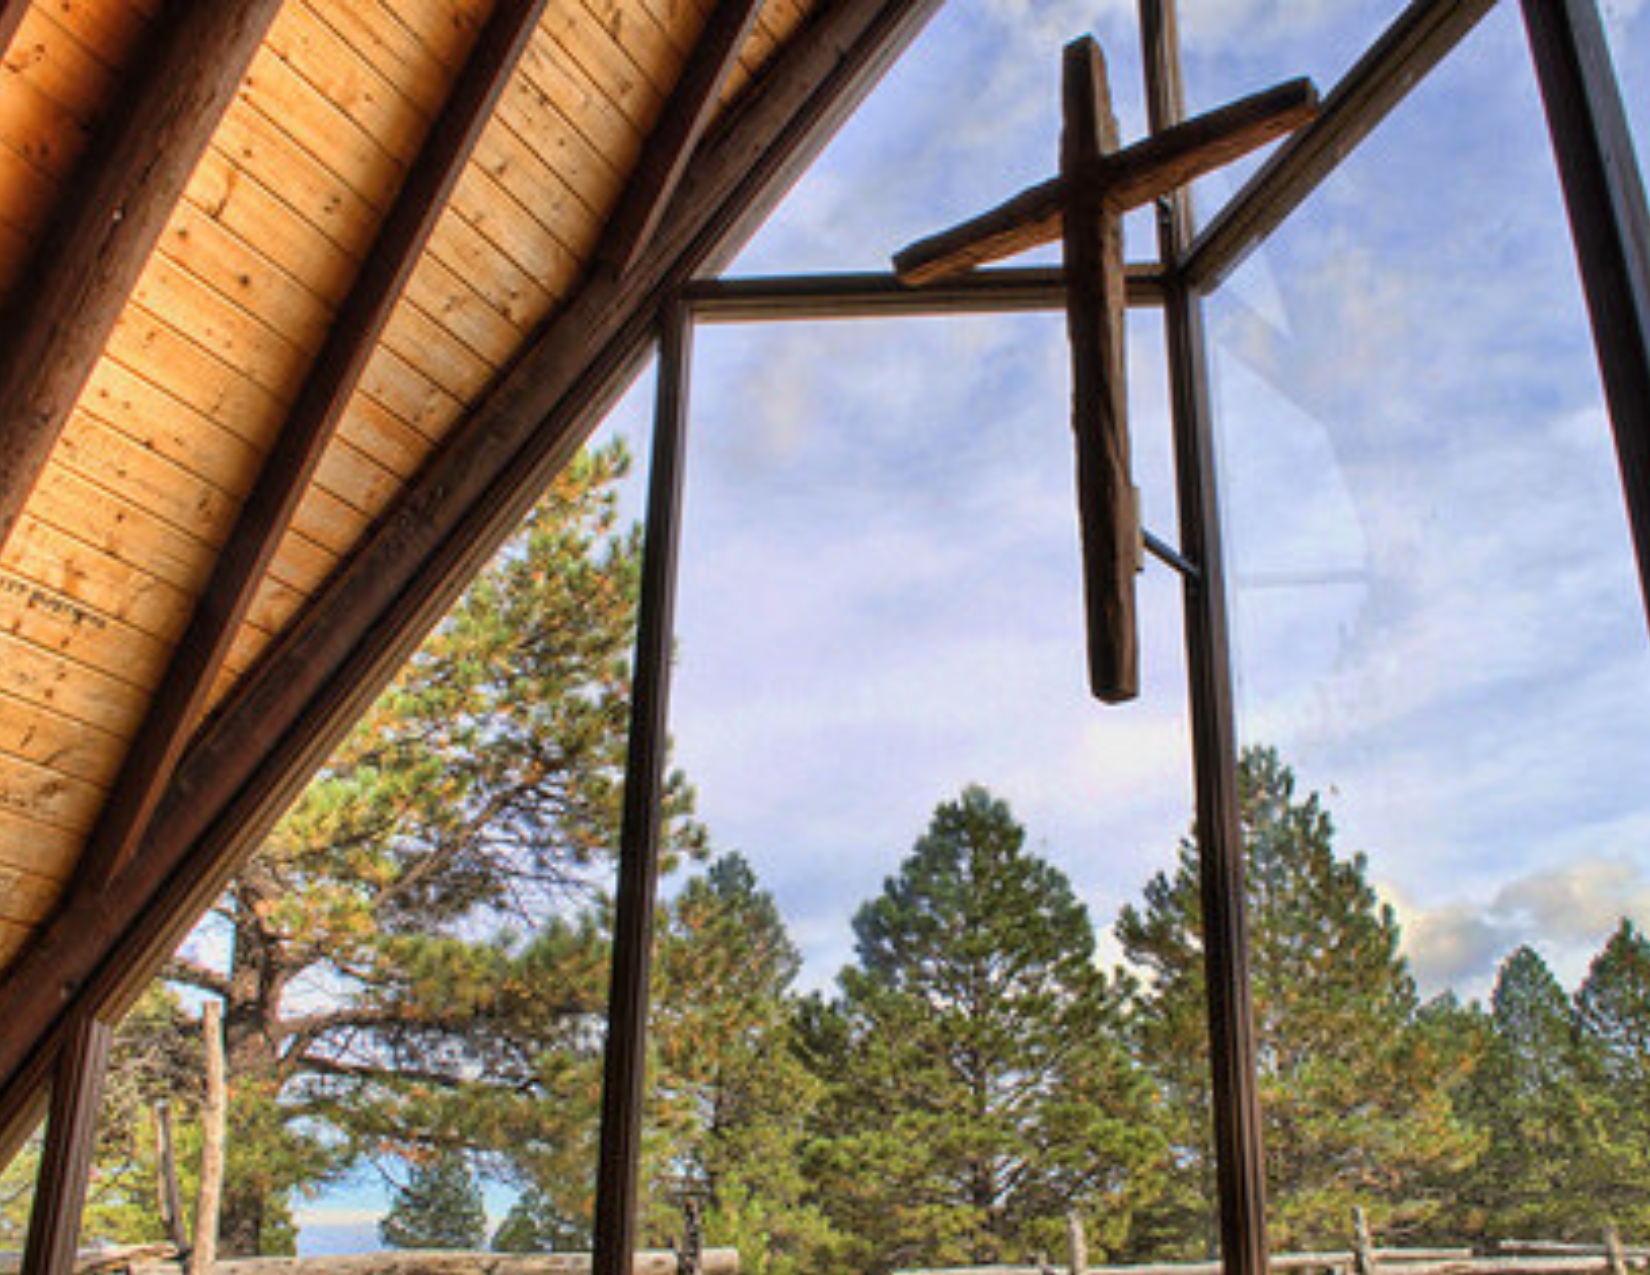 The view of ponderosa pines and aspens from large windows inside a small wedding chapel in Flagstaff, Arizona